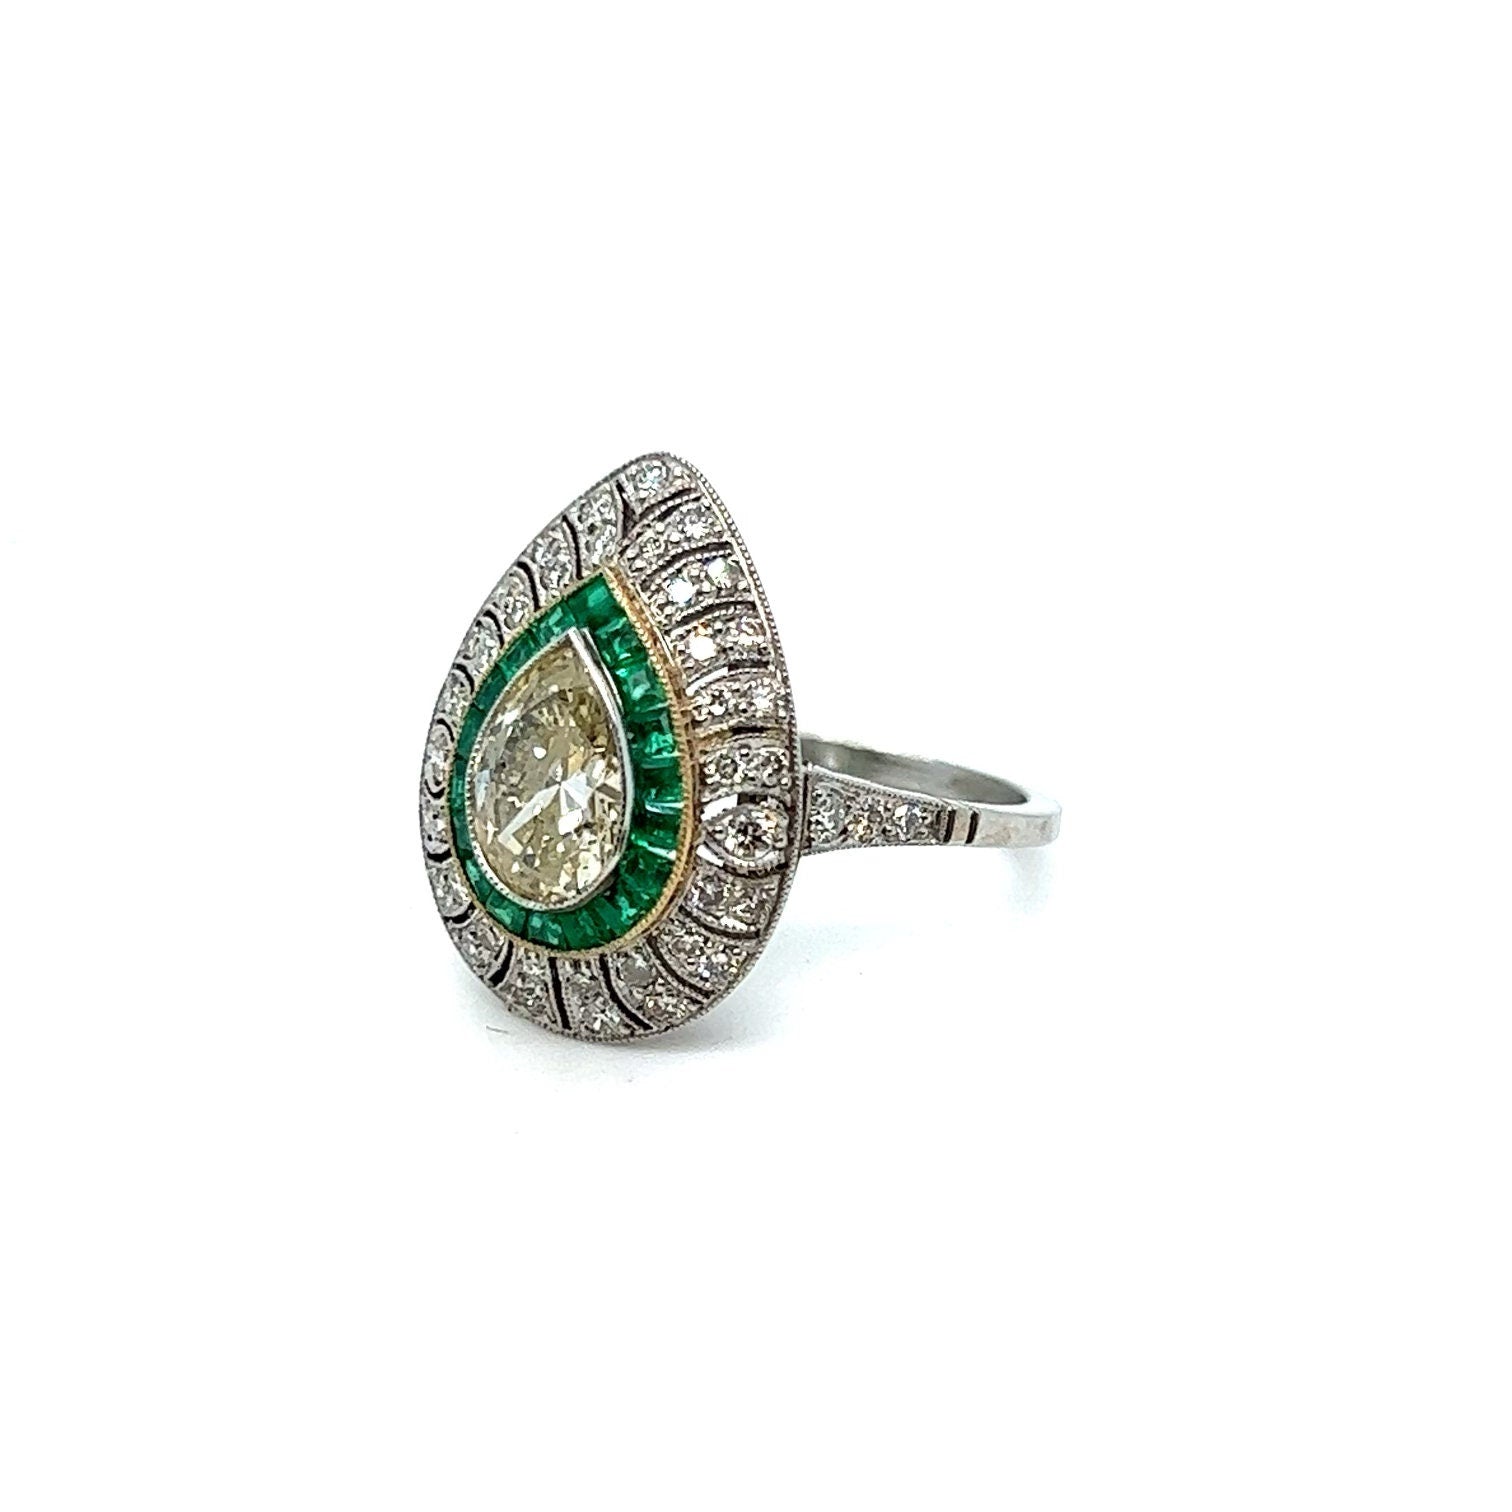 Stunning Pear Cut Diamond and Emerald Halo Ring Engagement Ring in Platinum - 2.45ct.